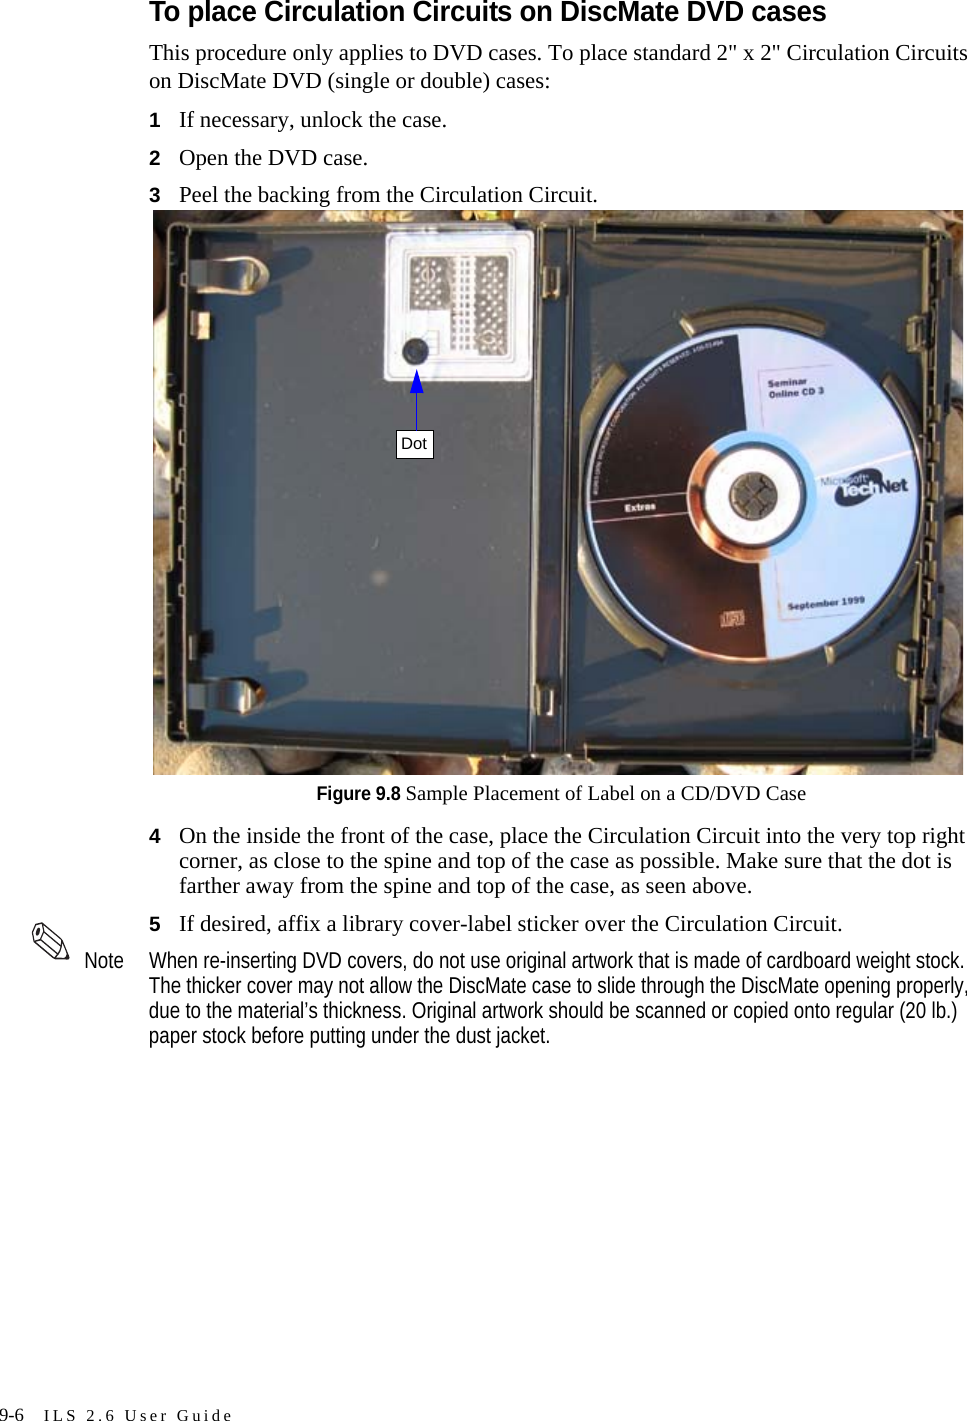 9-6 ILS 2.6 User GuideTo place Circulation Circuits on DiscMate DVD casesThis procedure only applies to DVD cases. To place standard 2&quot; x 2&quot; Circulation Circuits on DiscMate DVD (single or double) cases:1If necessary, unlock the case. 2Open the DVD case.3Peel the backing from the Circulation Circuit.Figure 9.8 Sample Placement of Label on a CD/DVD Case4On the inside the front of the case, place the Circulation Circuit into the very top right corner, as close to the spine and top of the case as possible. Make sure that the dot is farther away from the spine and top of the case, as seen above.5If desired, affix a library cover-label sticker over the Circulation Circuit. Note When re-inserting DVD covers, do not use original artwork that is made of cardboard weight stock. The thicker cover may not allow the DiscMate case to slide through the DiscMate opening properly, due to the material’s thickness. Original artwork should be scanned or copied onto regular (20 lb.) paper stock before putting under the dust jacket.Dot